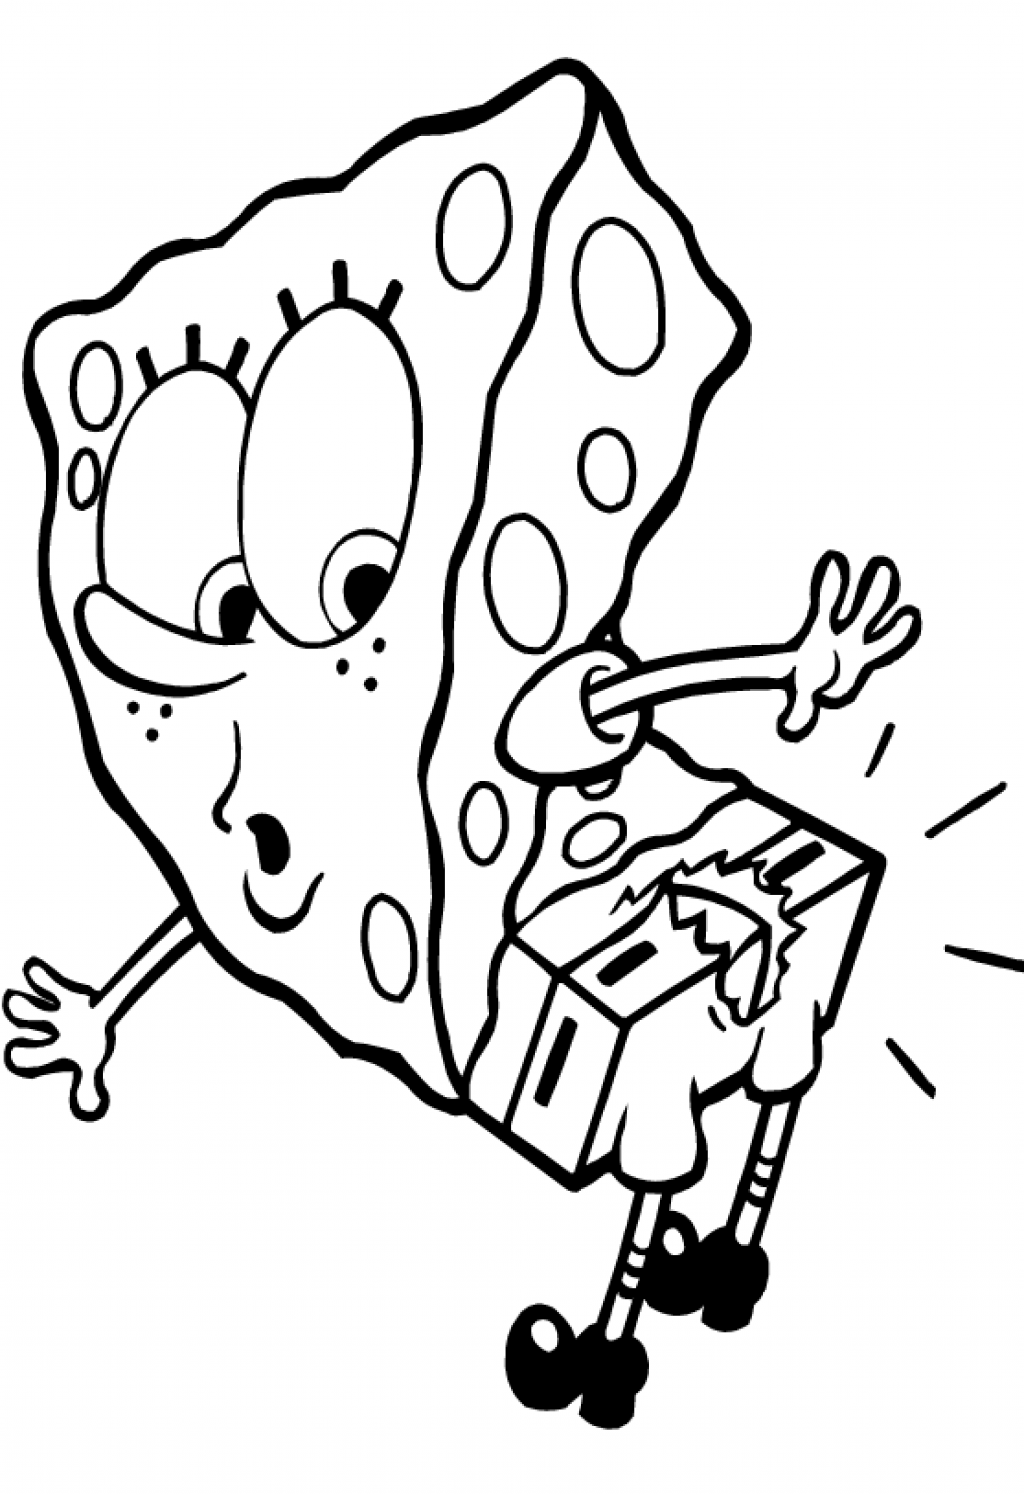 Spongebob Coloring Pages To Print - Coloring